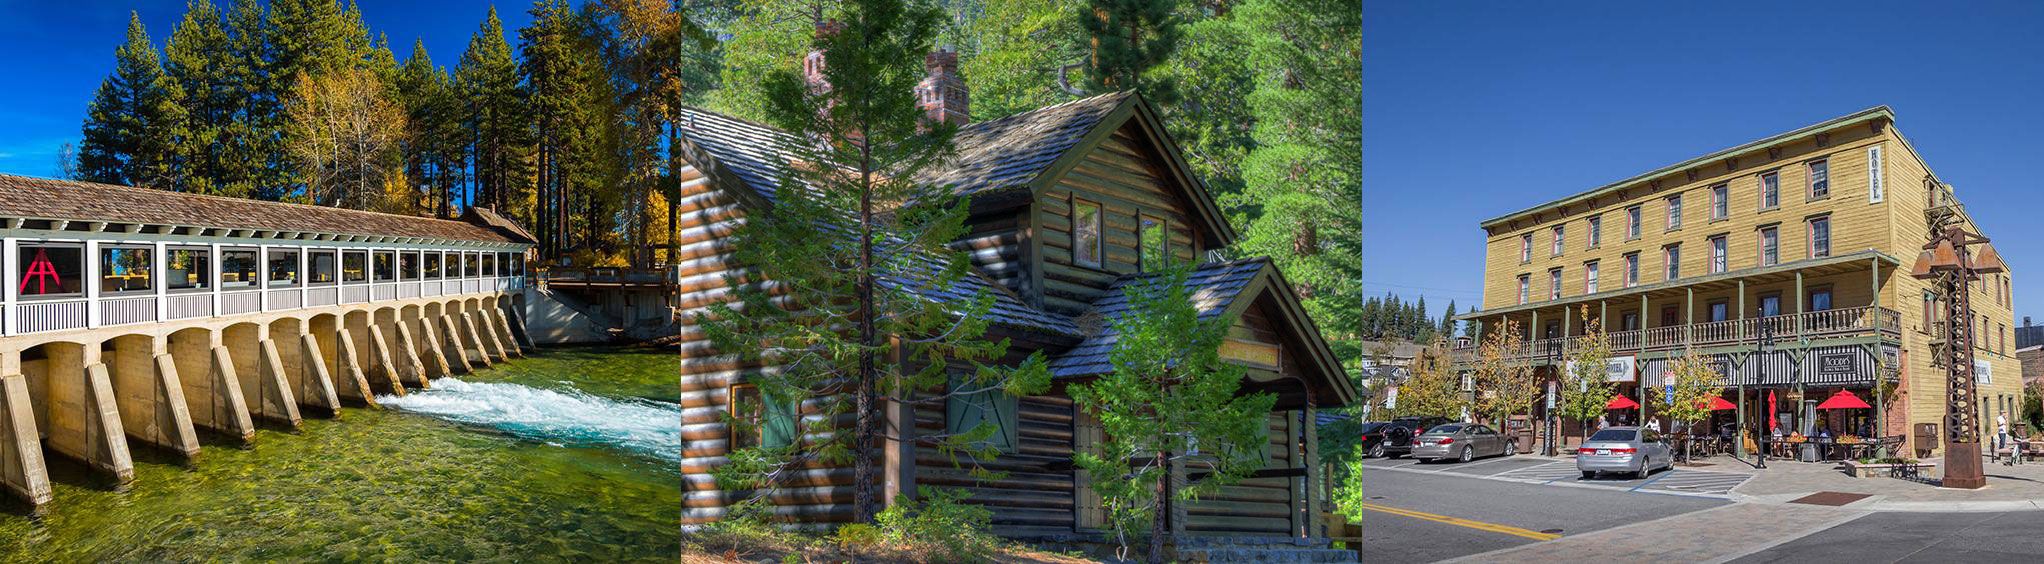 North Lake Tahoe Historical Society and Gatekeepers Museum